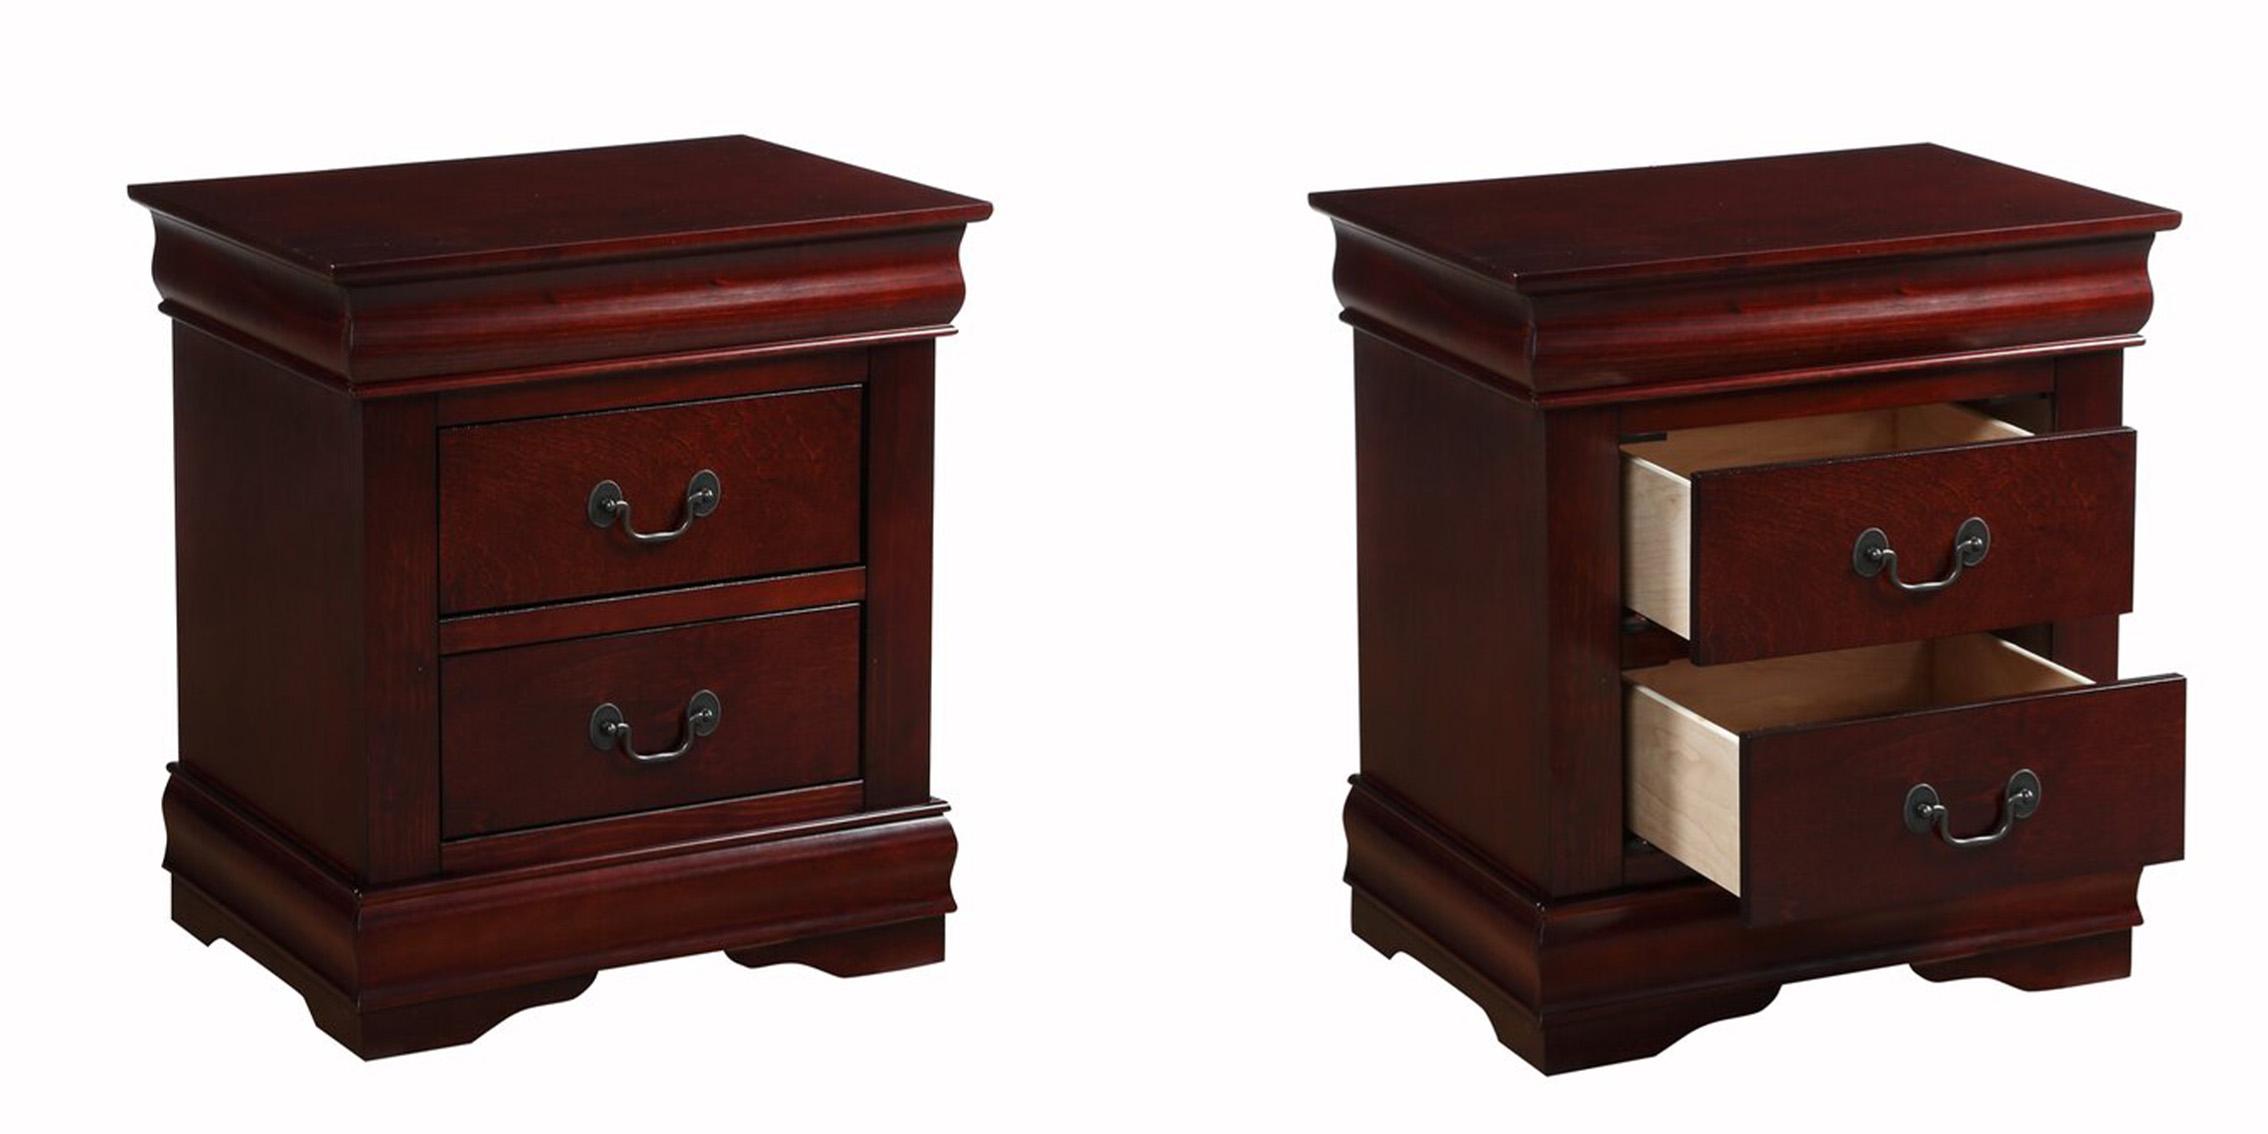 Contemporary, Modern Nightstand Set LOUIS PHILLIPE GHF-808857644695-Set-2 in Cherry 